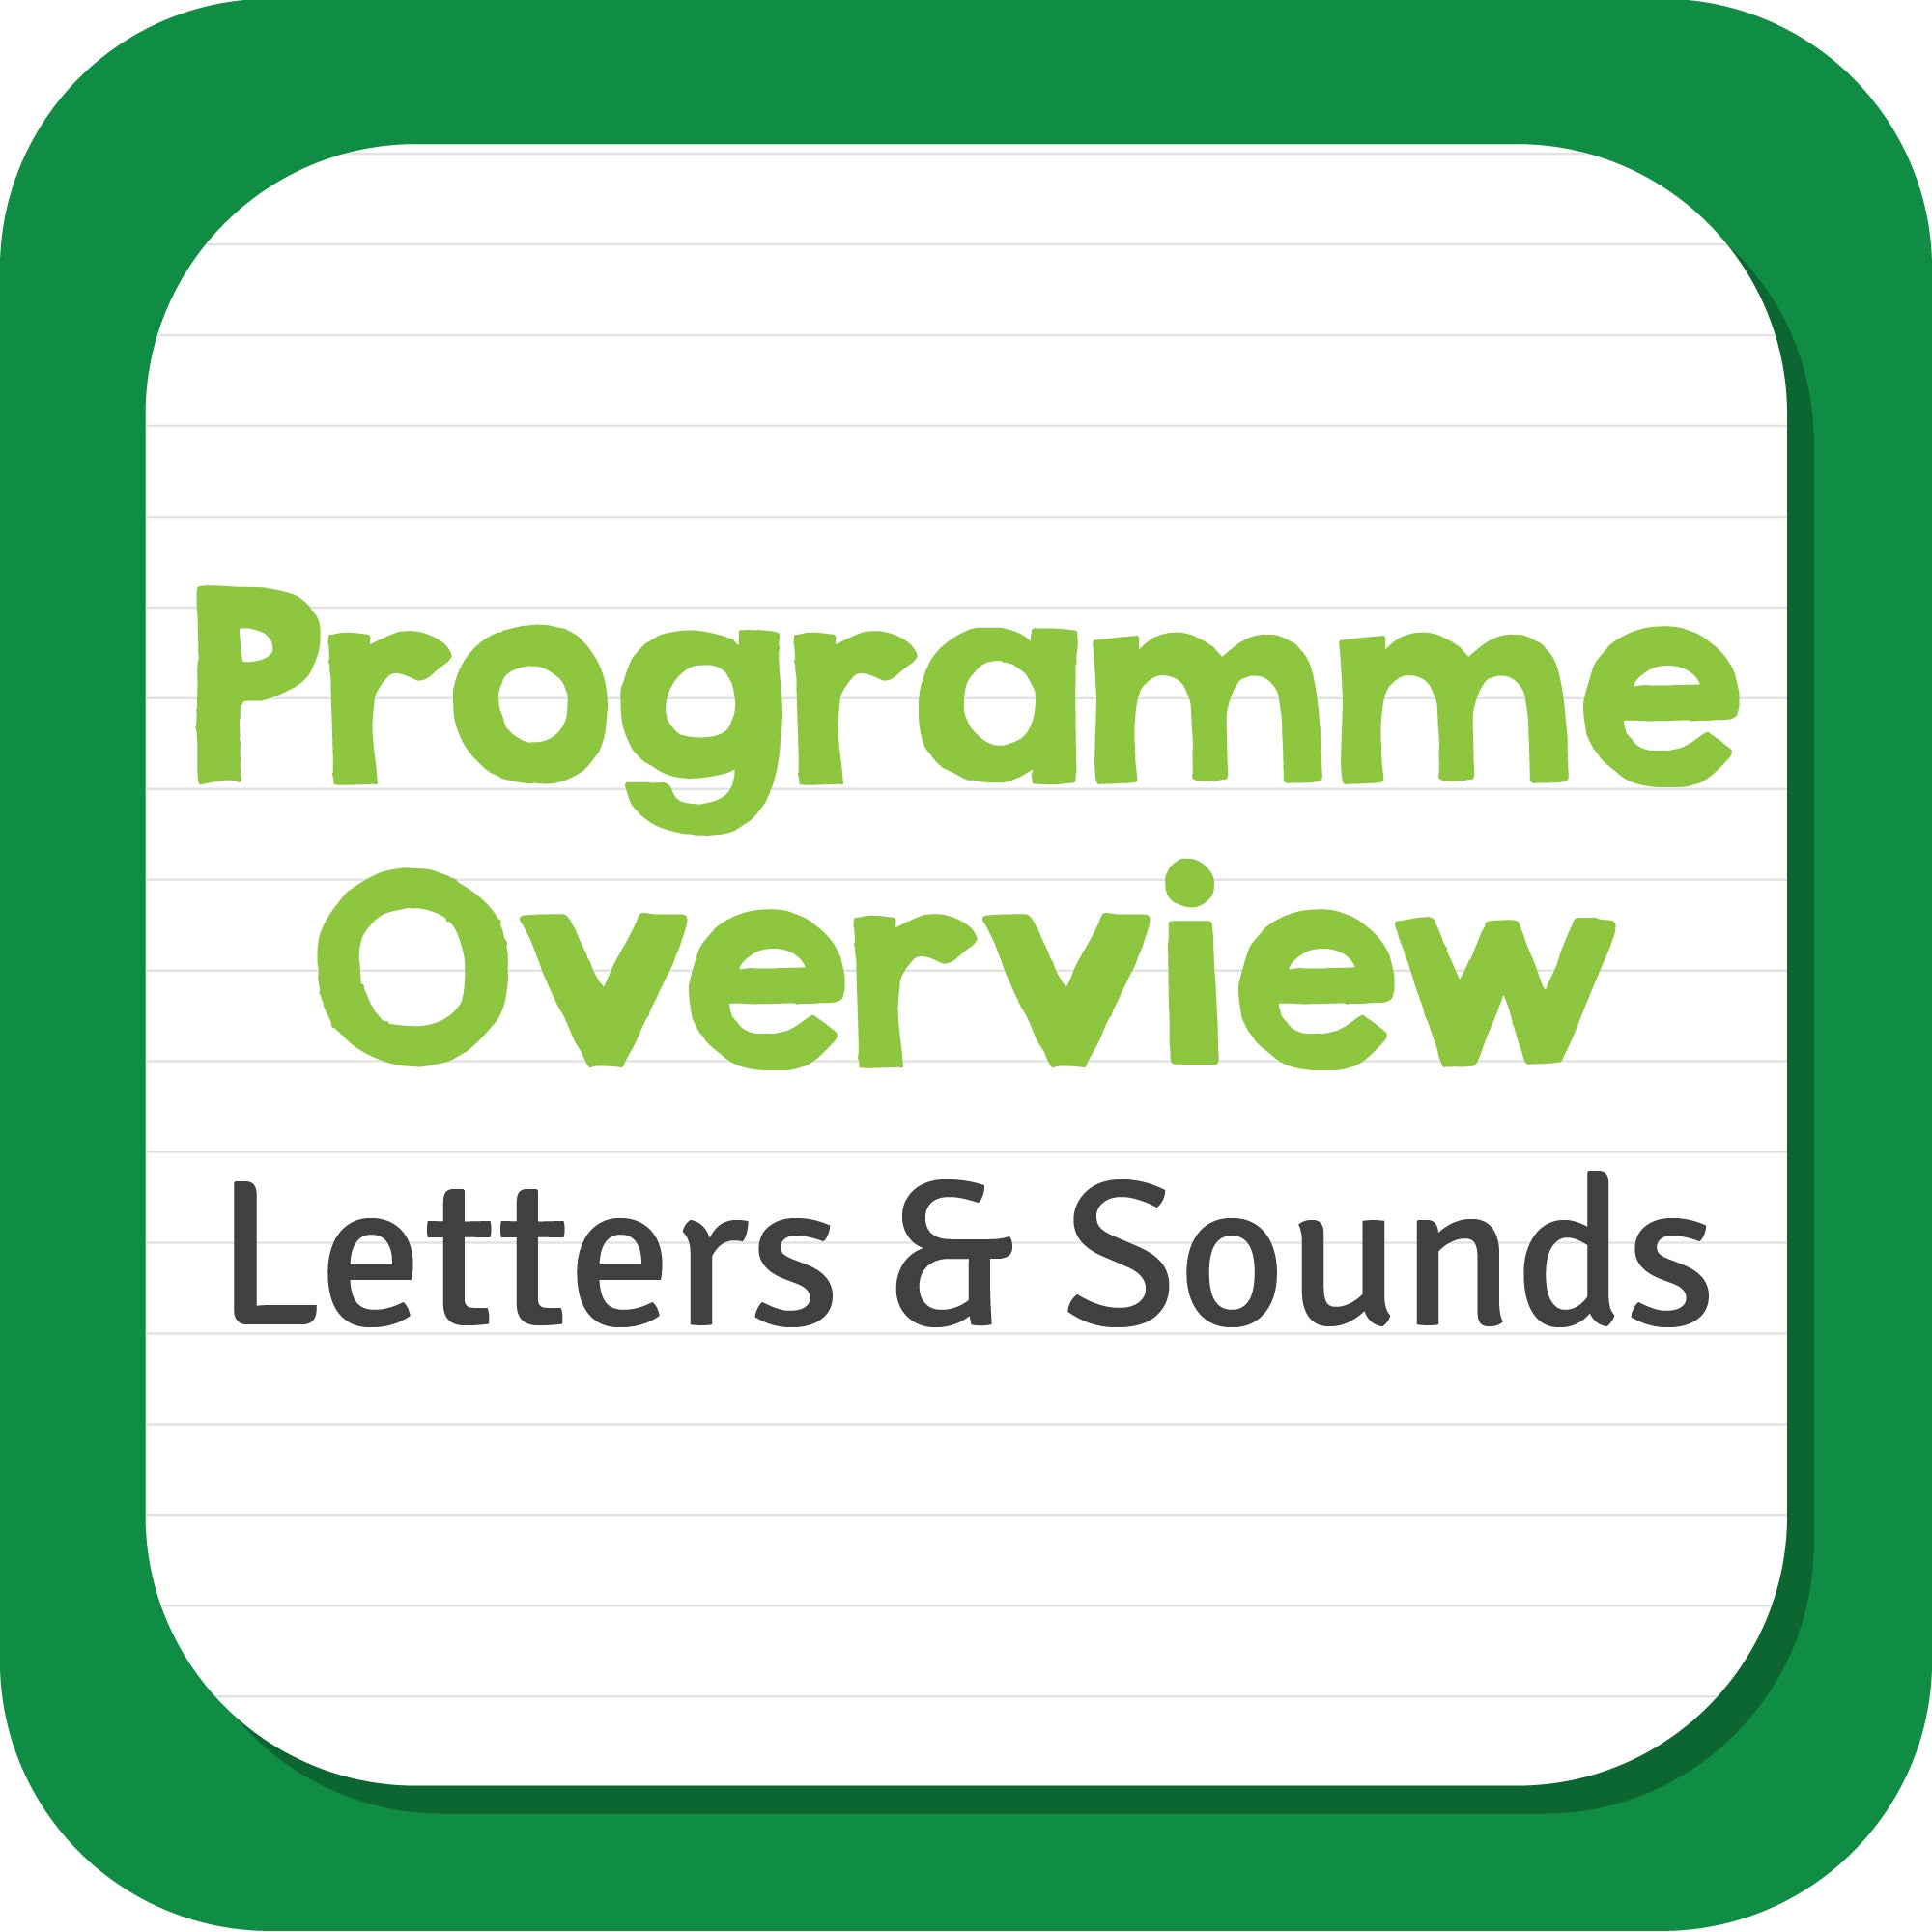 Letters & Sounds Programme Overview